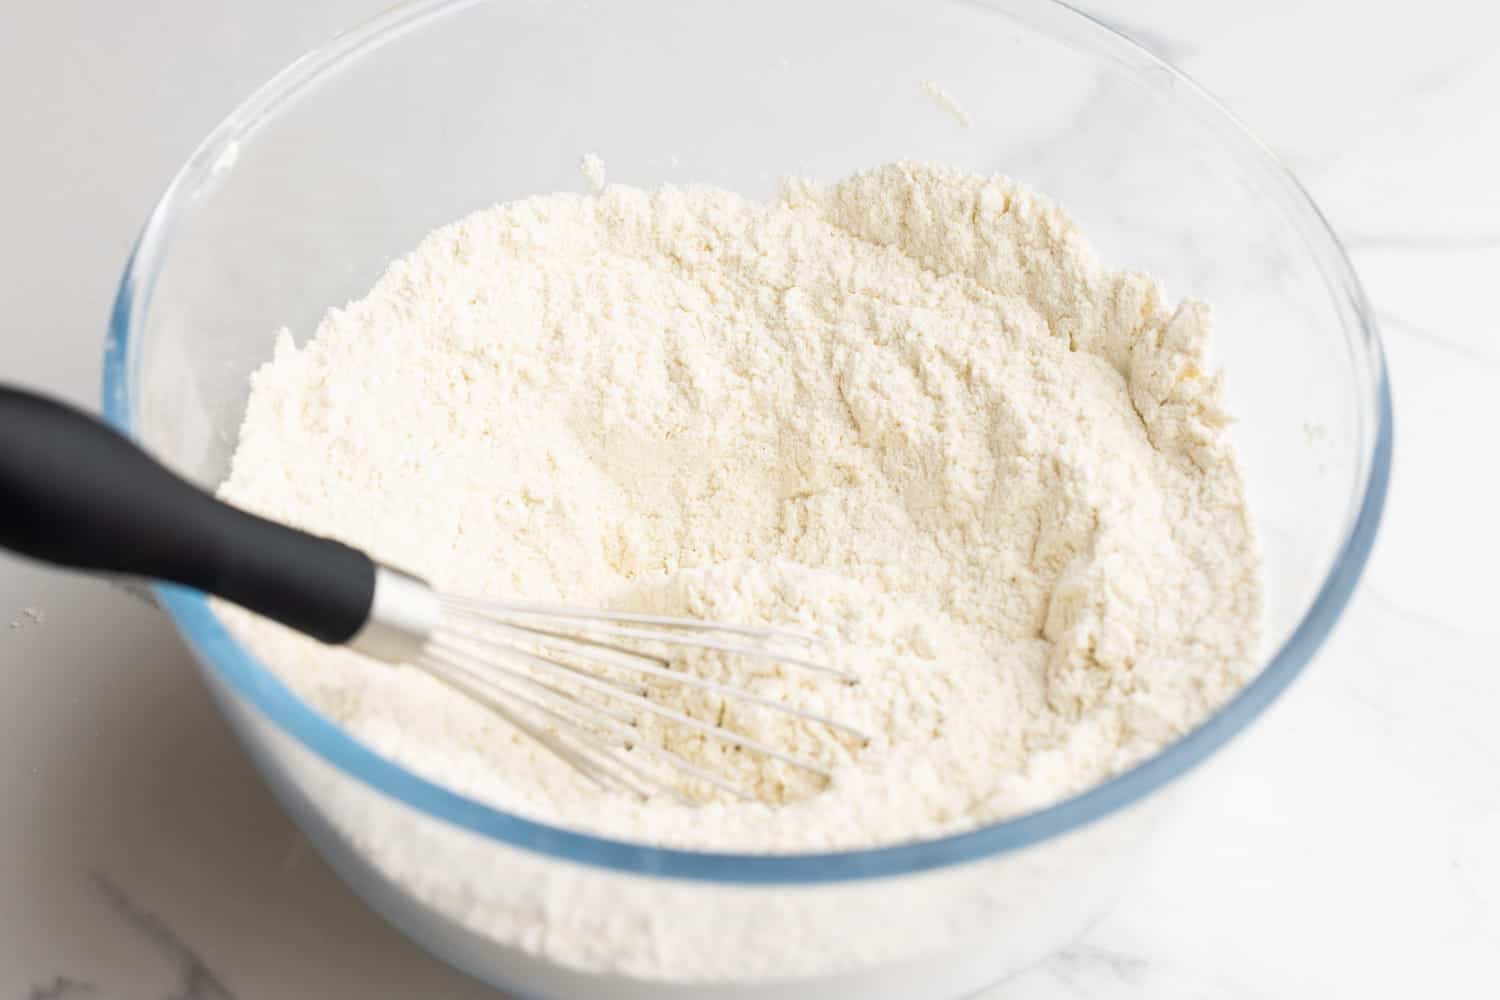 homemade pancake mix, whisked together in a clear glass mixing bowl.